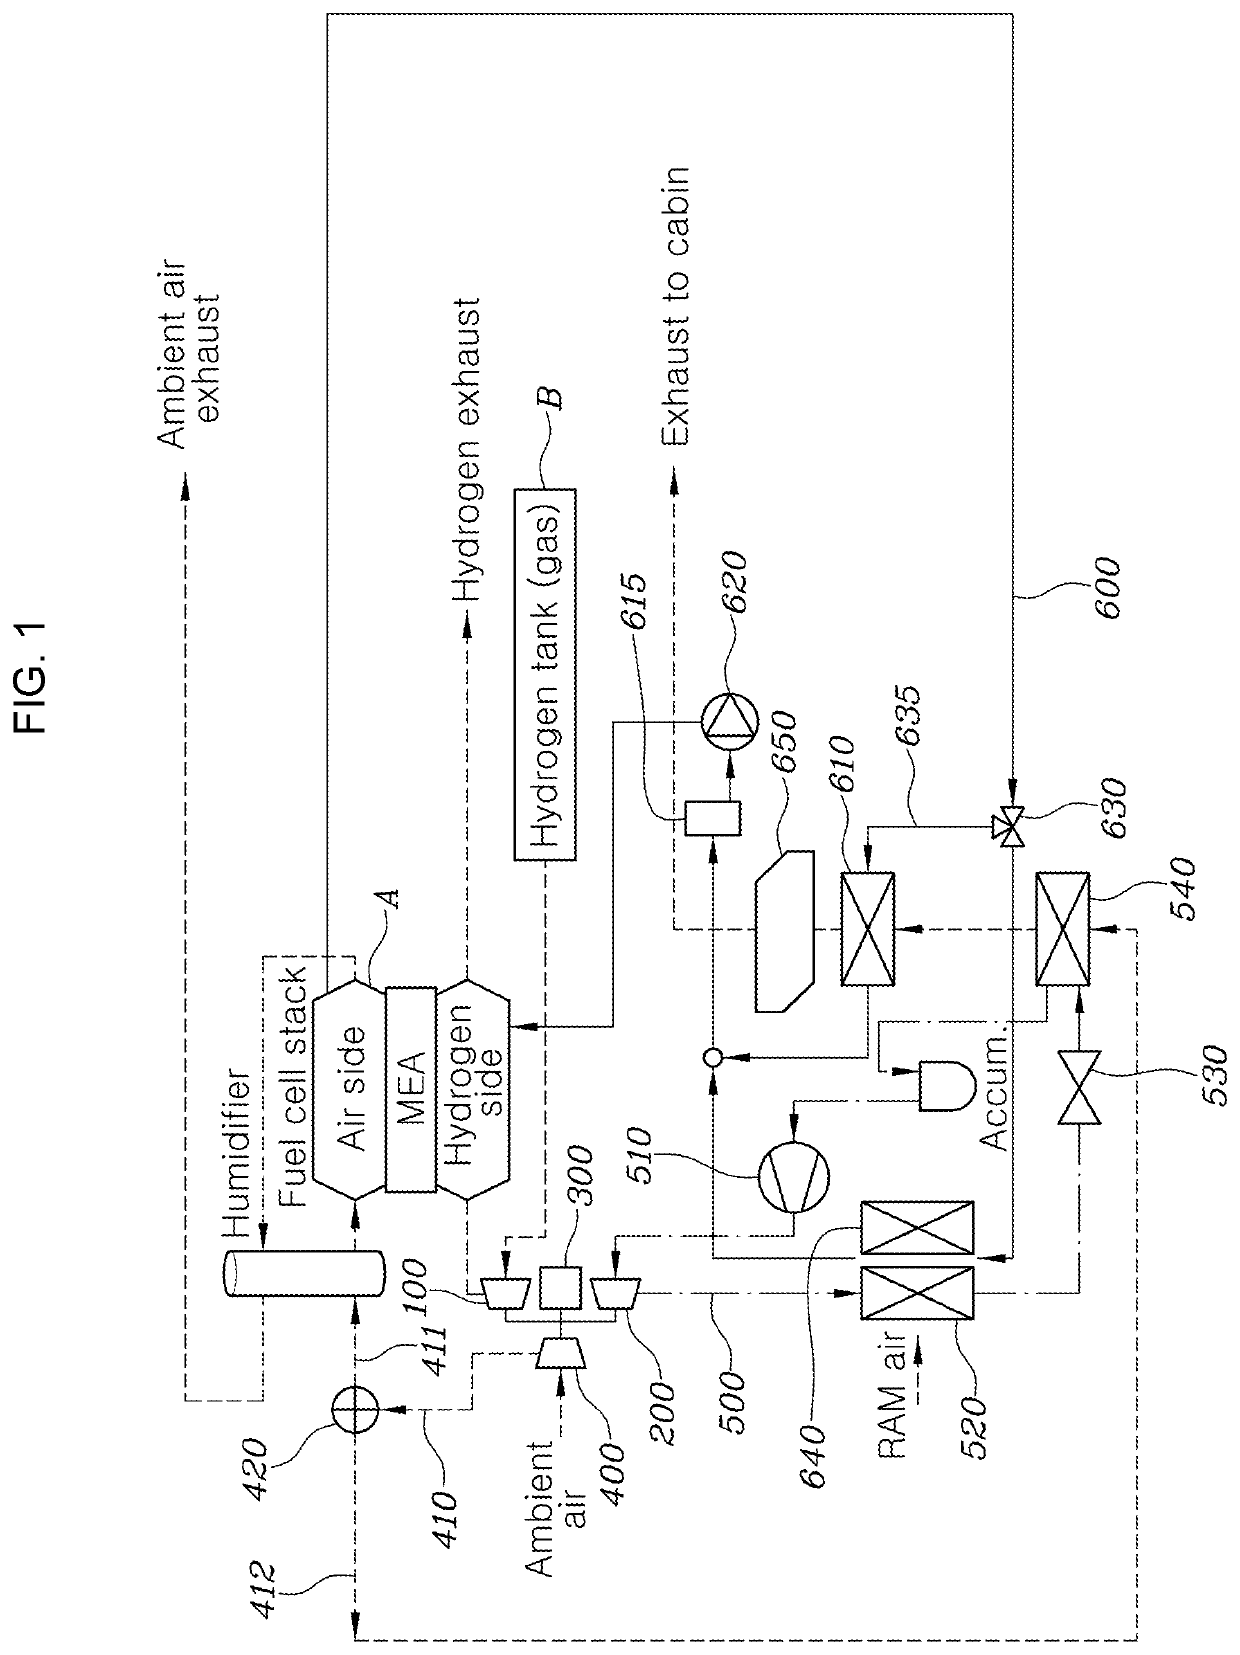 Integrated thermal management system for fuel cell mobility vehicles